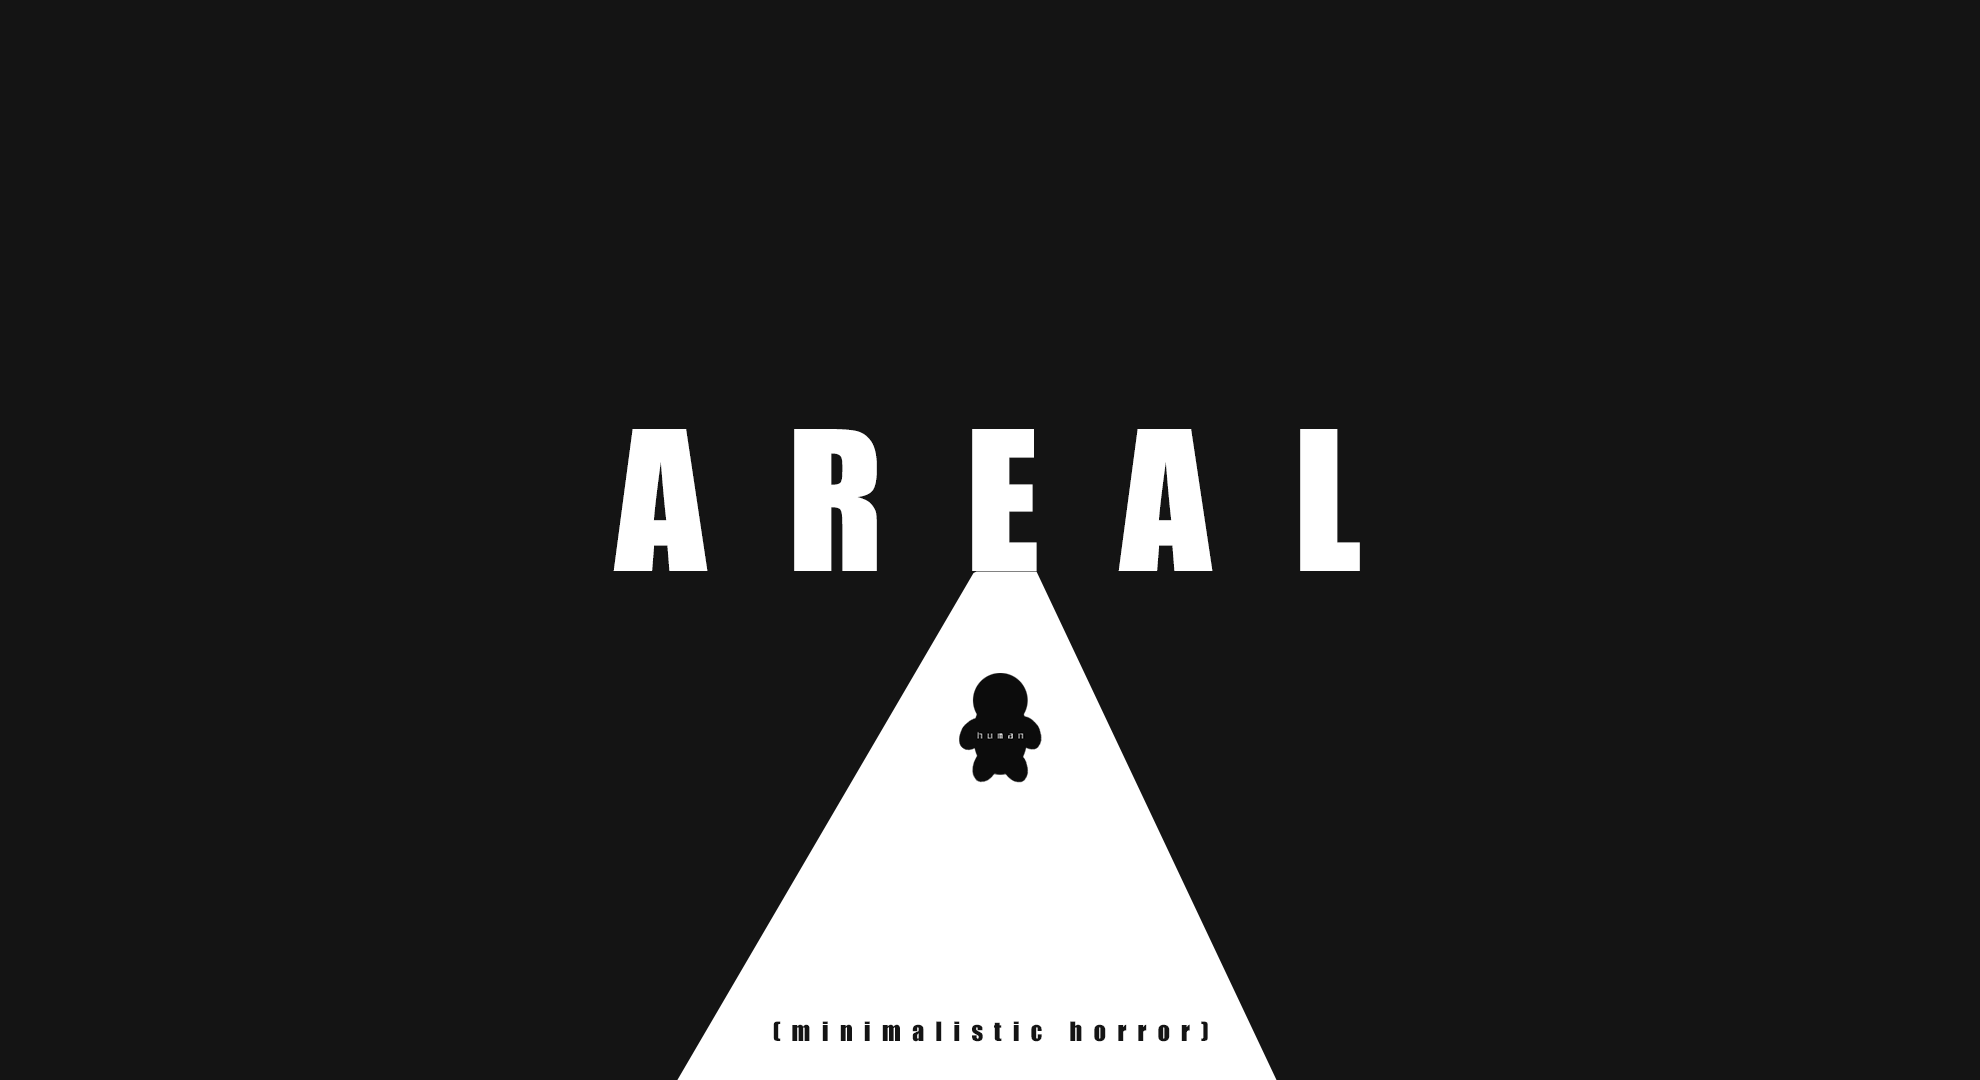 AREAL